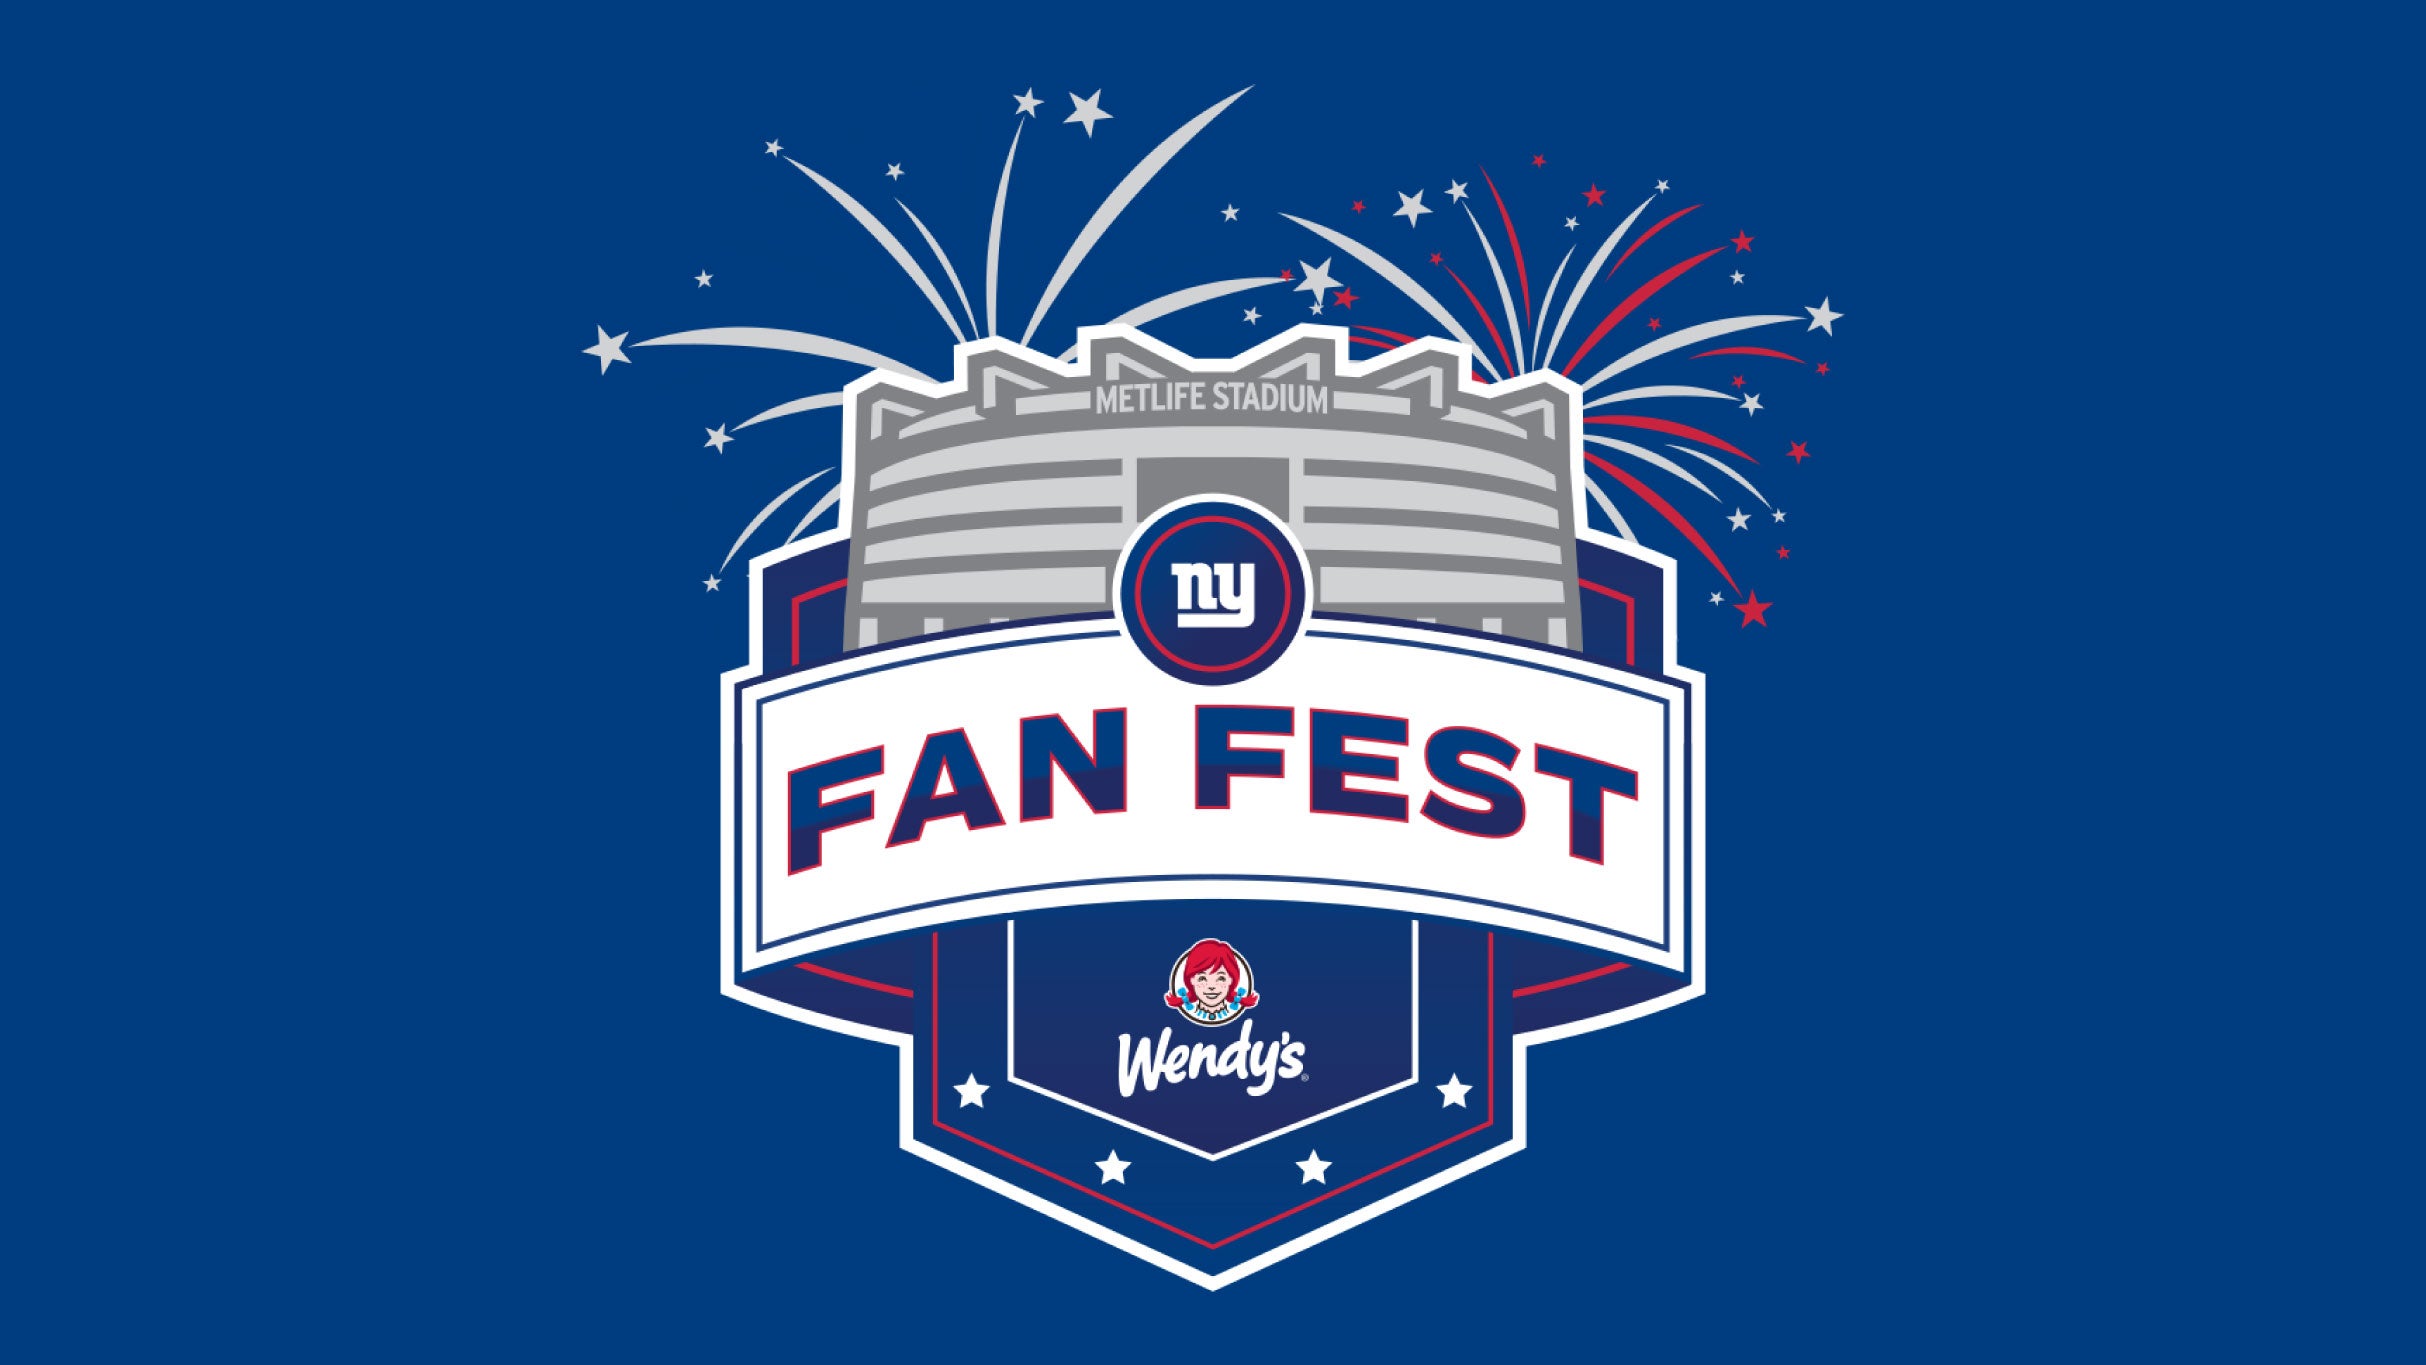 2023 Giants Fan Fest Movie Night Presented By Wendy's in East Rutherford promo photo for STicketmaster presale offer code